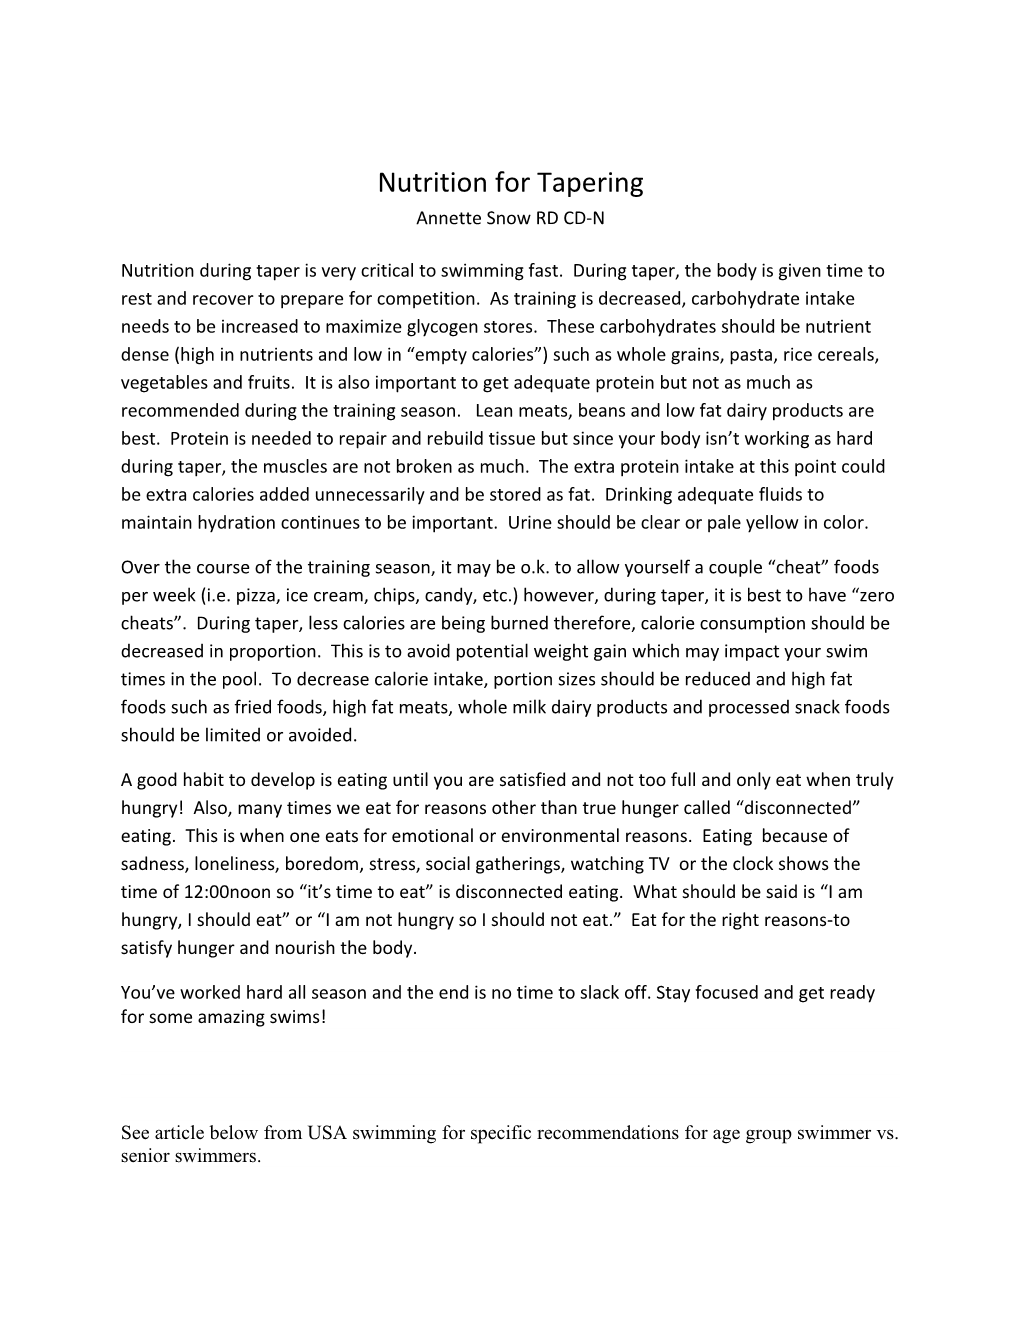 Nutrition for Tapering